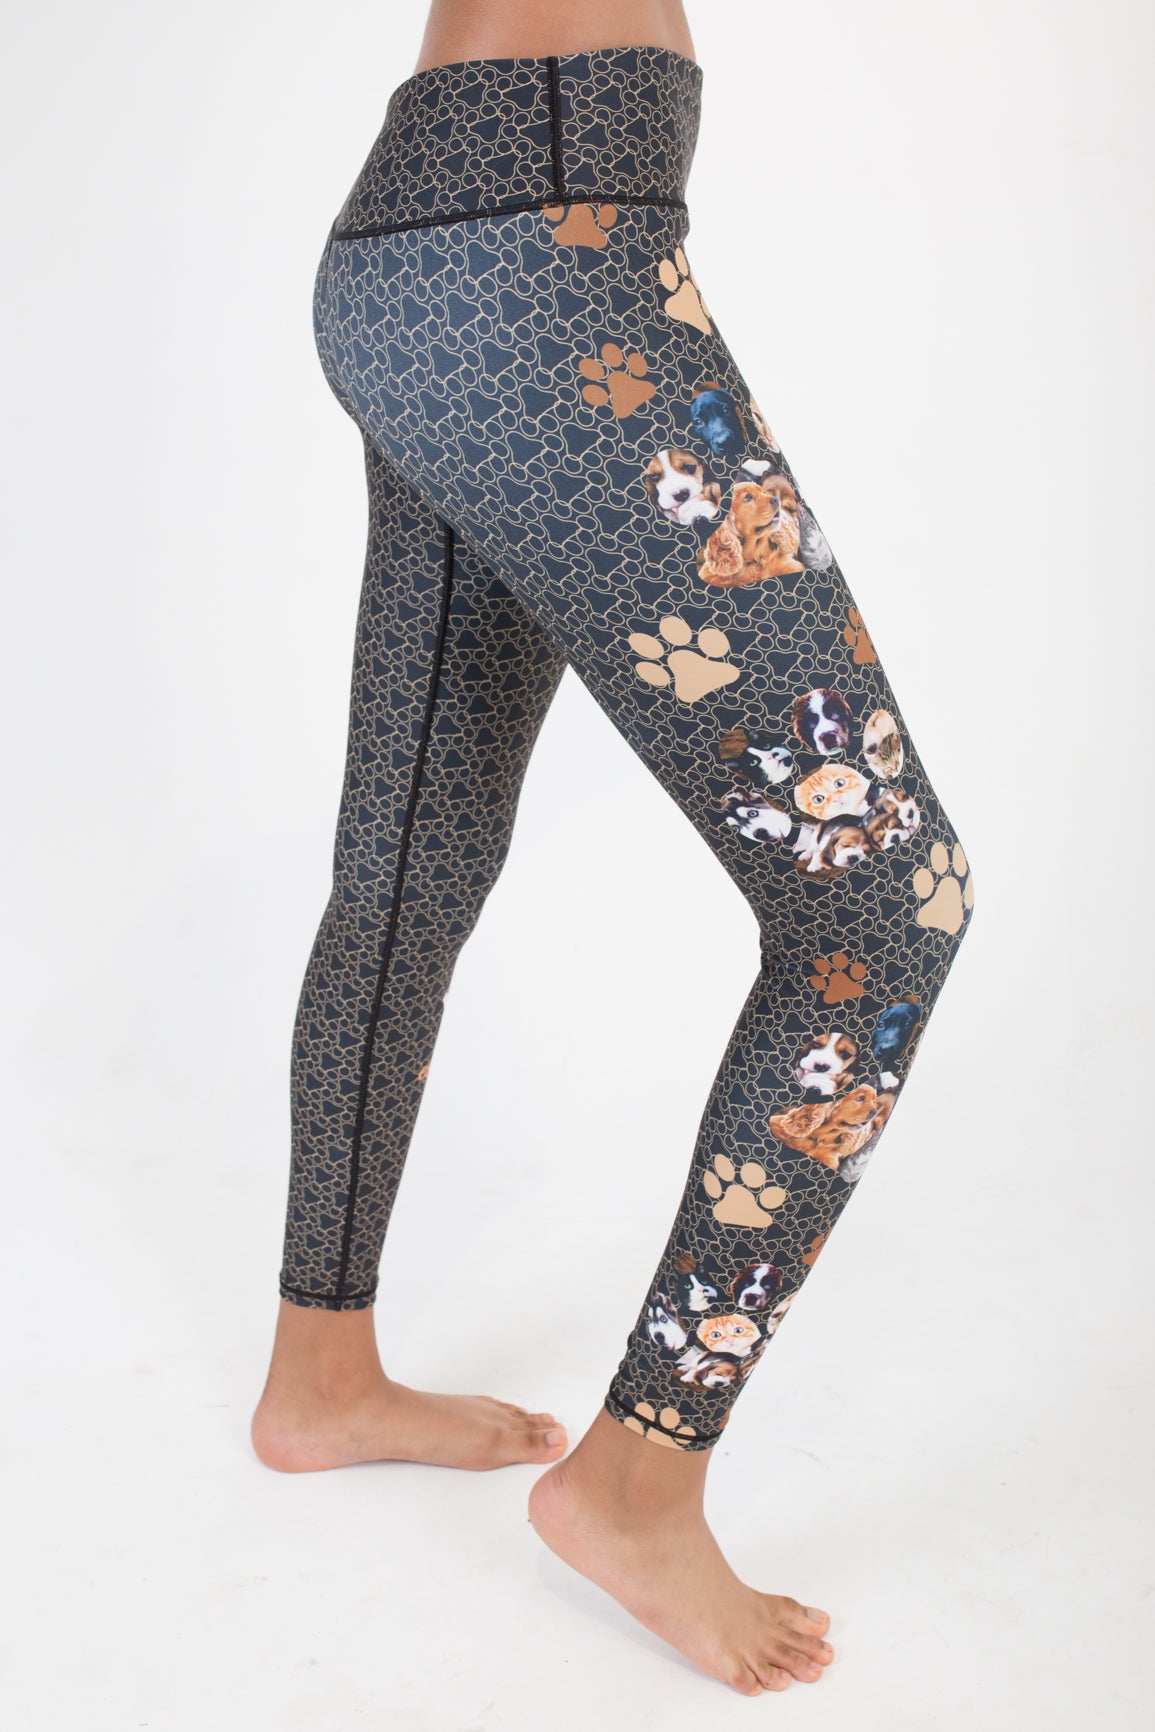 PUPPIES AND KITTENS LEGGINGS COMBO - Escala Activewear